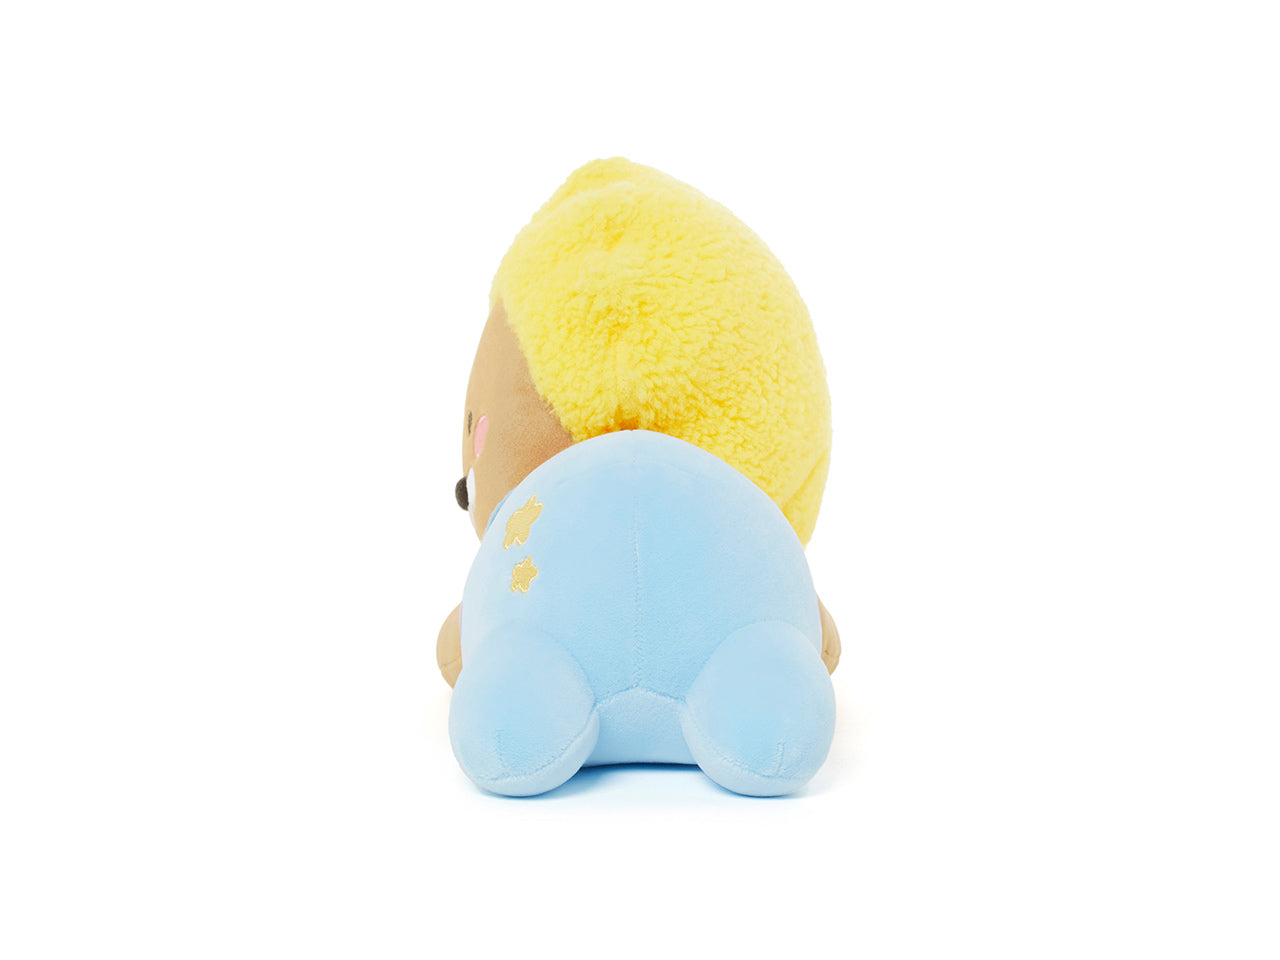 kakao friends jay-g in skyblue overall plush toy side